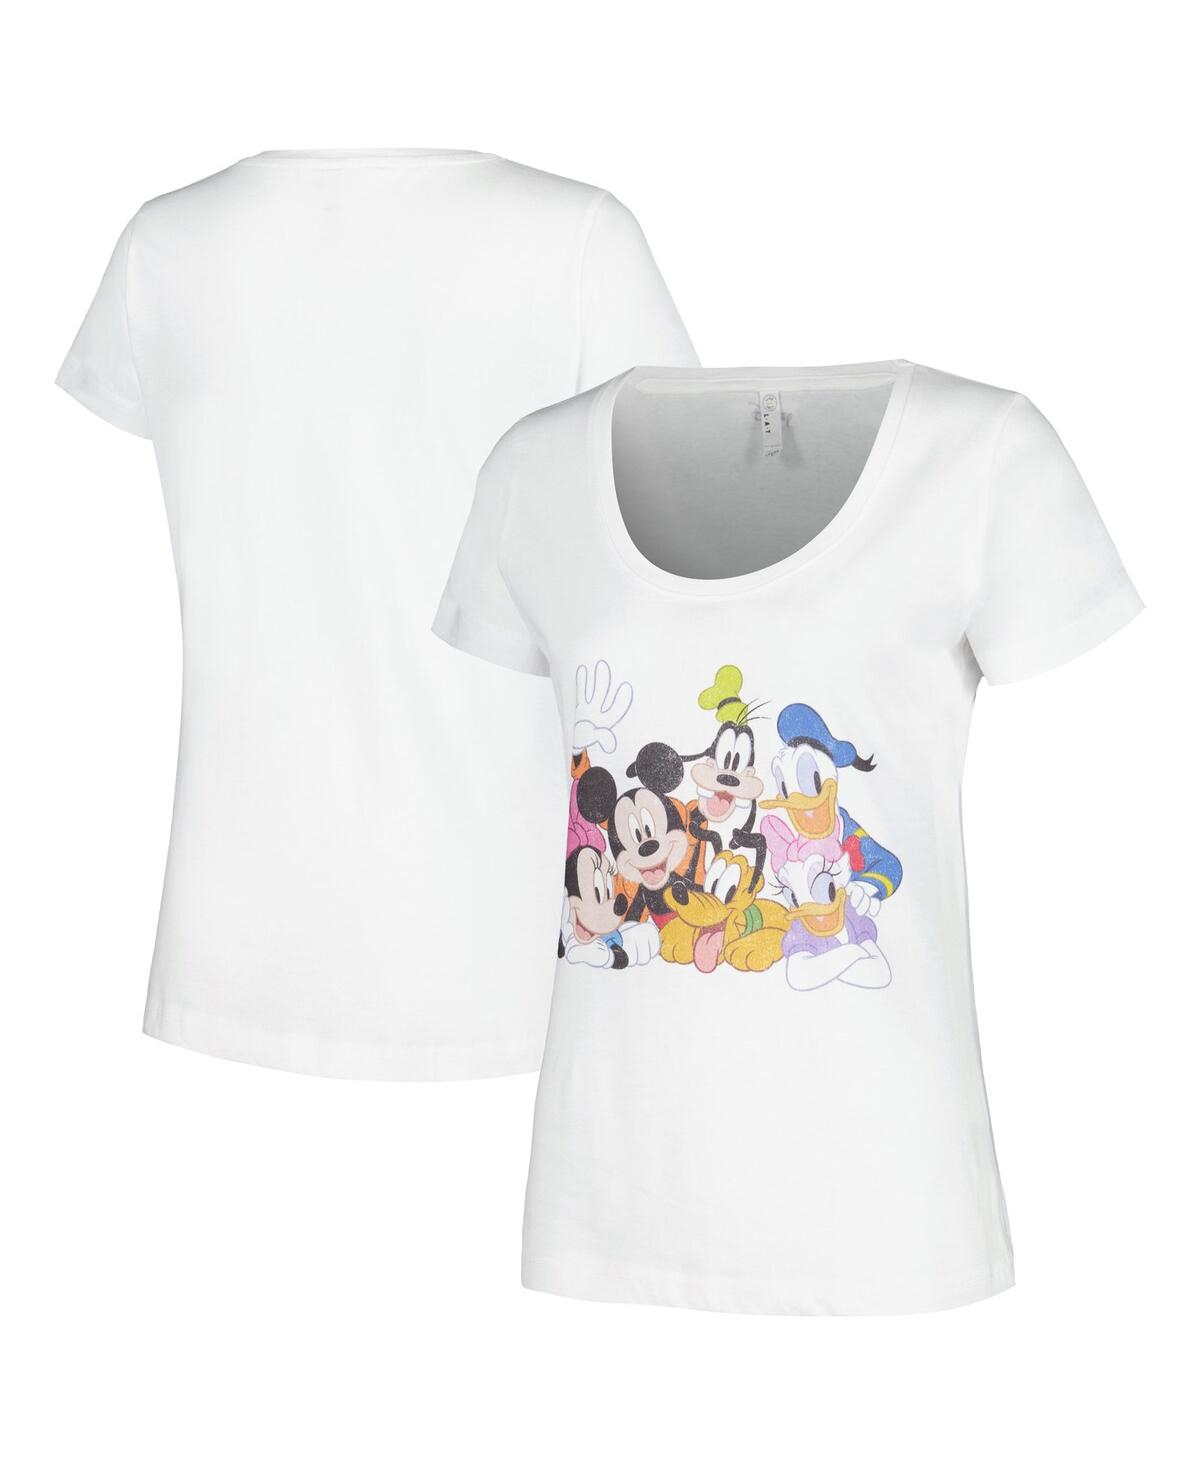 Women's Mad Engine White Distressed Mickey and Friends Group Scoop Neck T-shirt - White